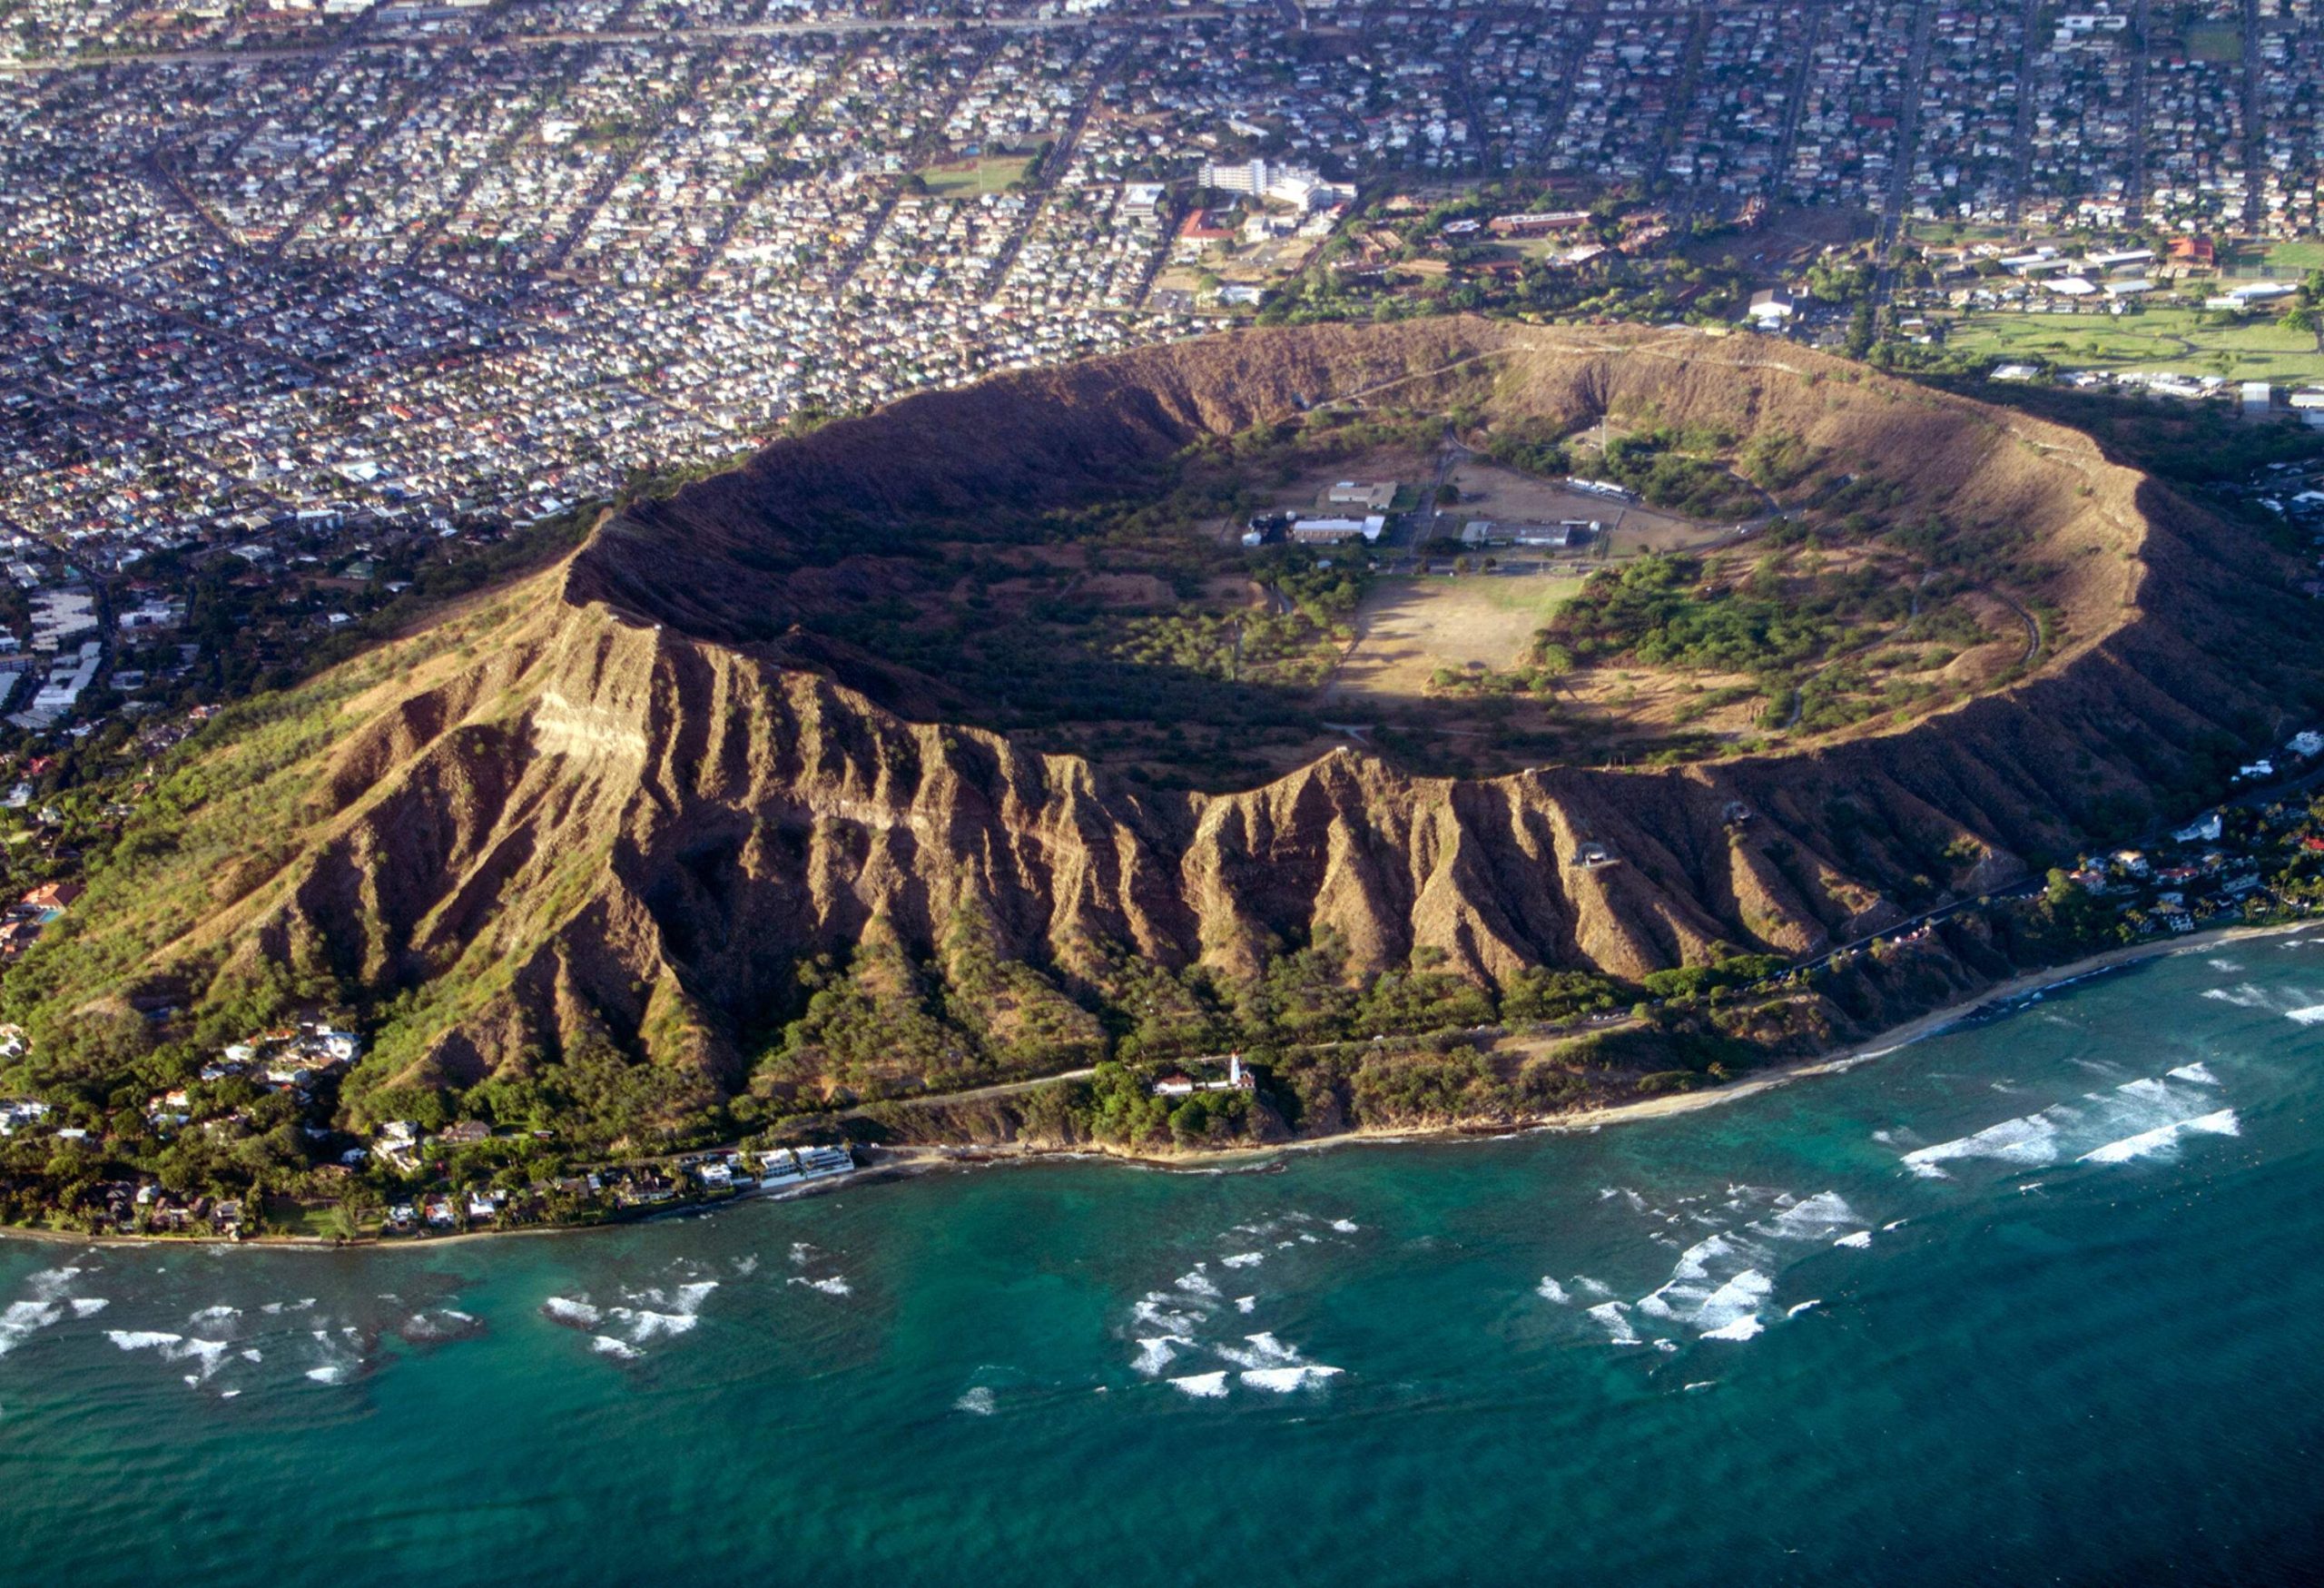 The iconic Diamond Head crater rises majestically, encircled by a bustling town located near the picturesque coast.